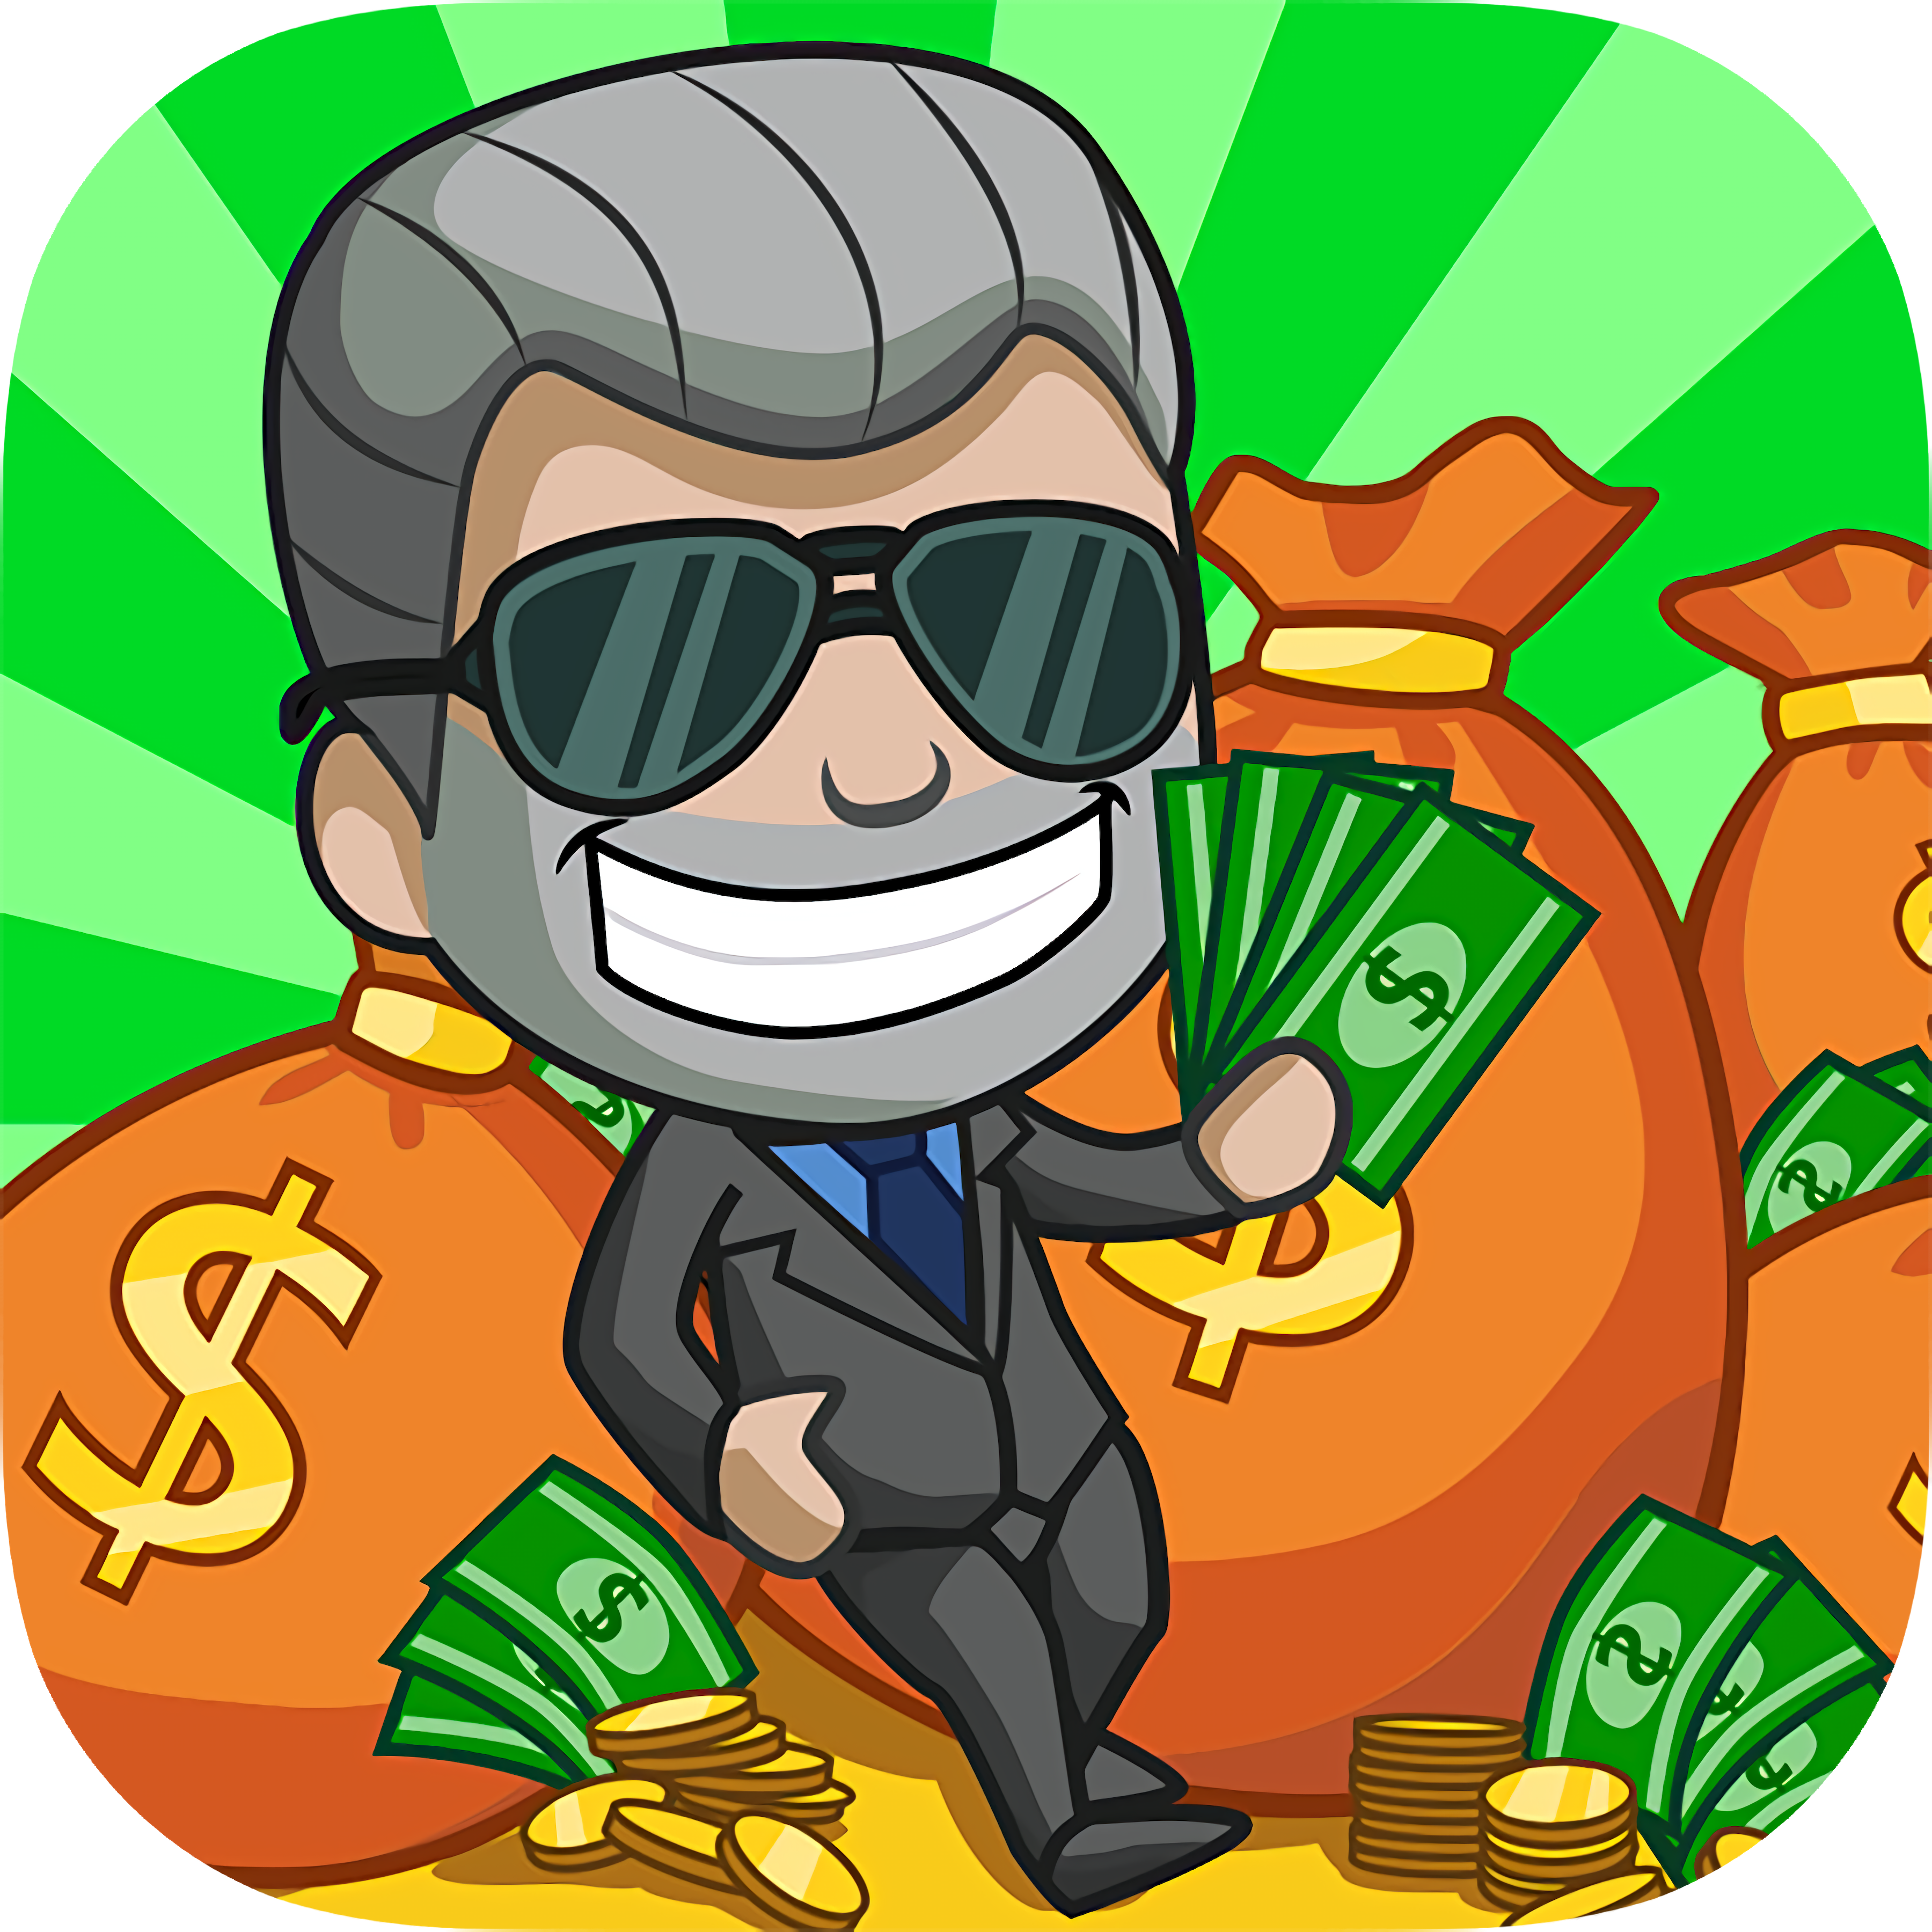 Tycoon Games